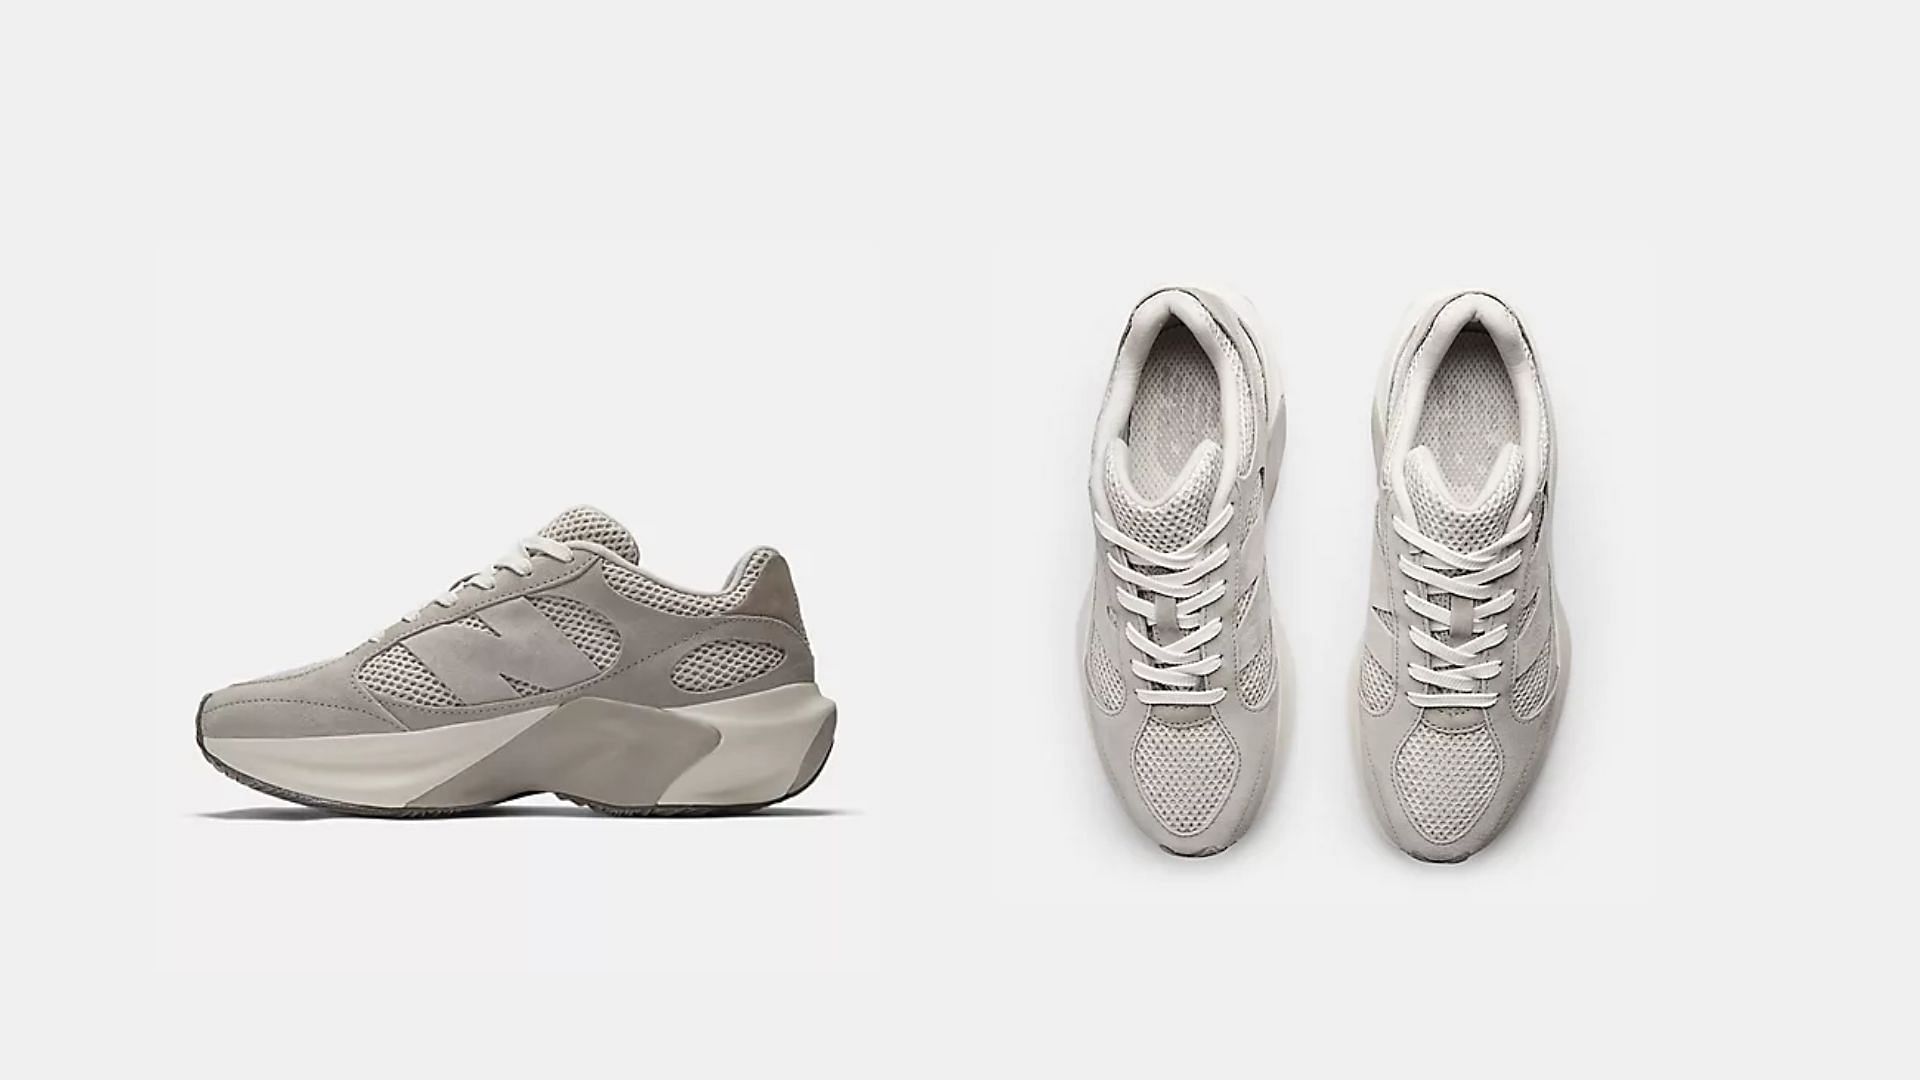 New Balance WRPD Grey Days &quot;Moonrock&quot; sneakers ( Image via New Balance)